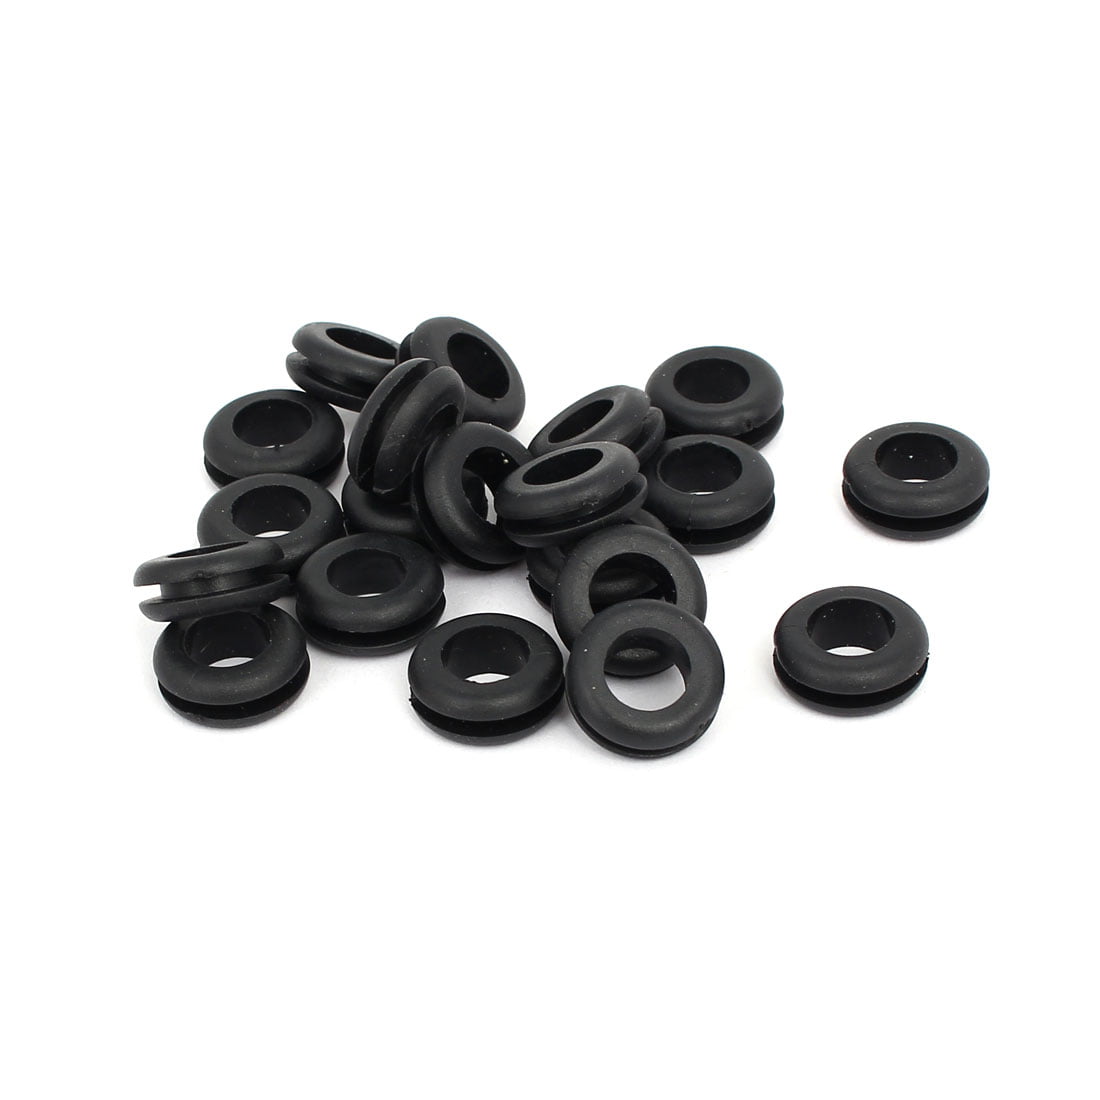 X AUTOHAUX 25pcs 27mm Rubber Grommet Eyelet Ring Gasket Double Side O Ring Electric Cable Protector Black for Car 